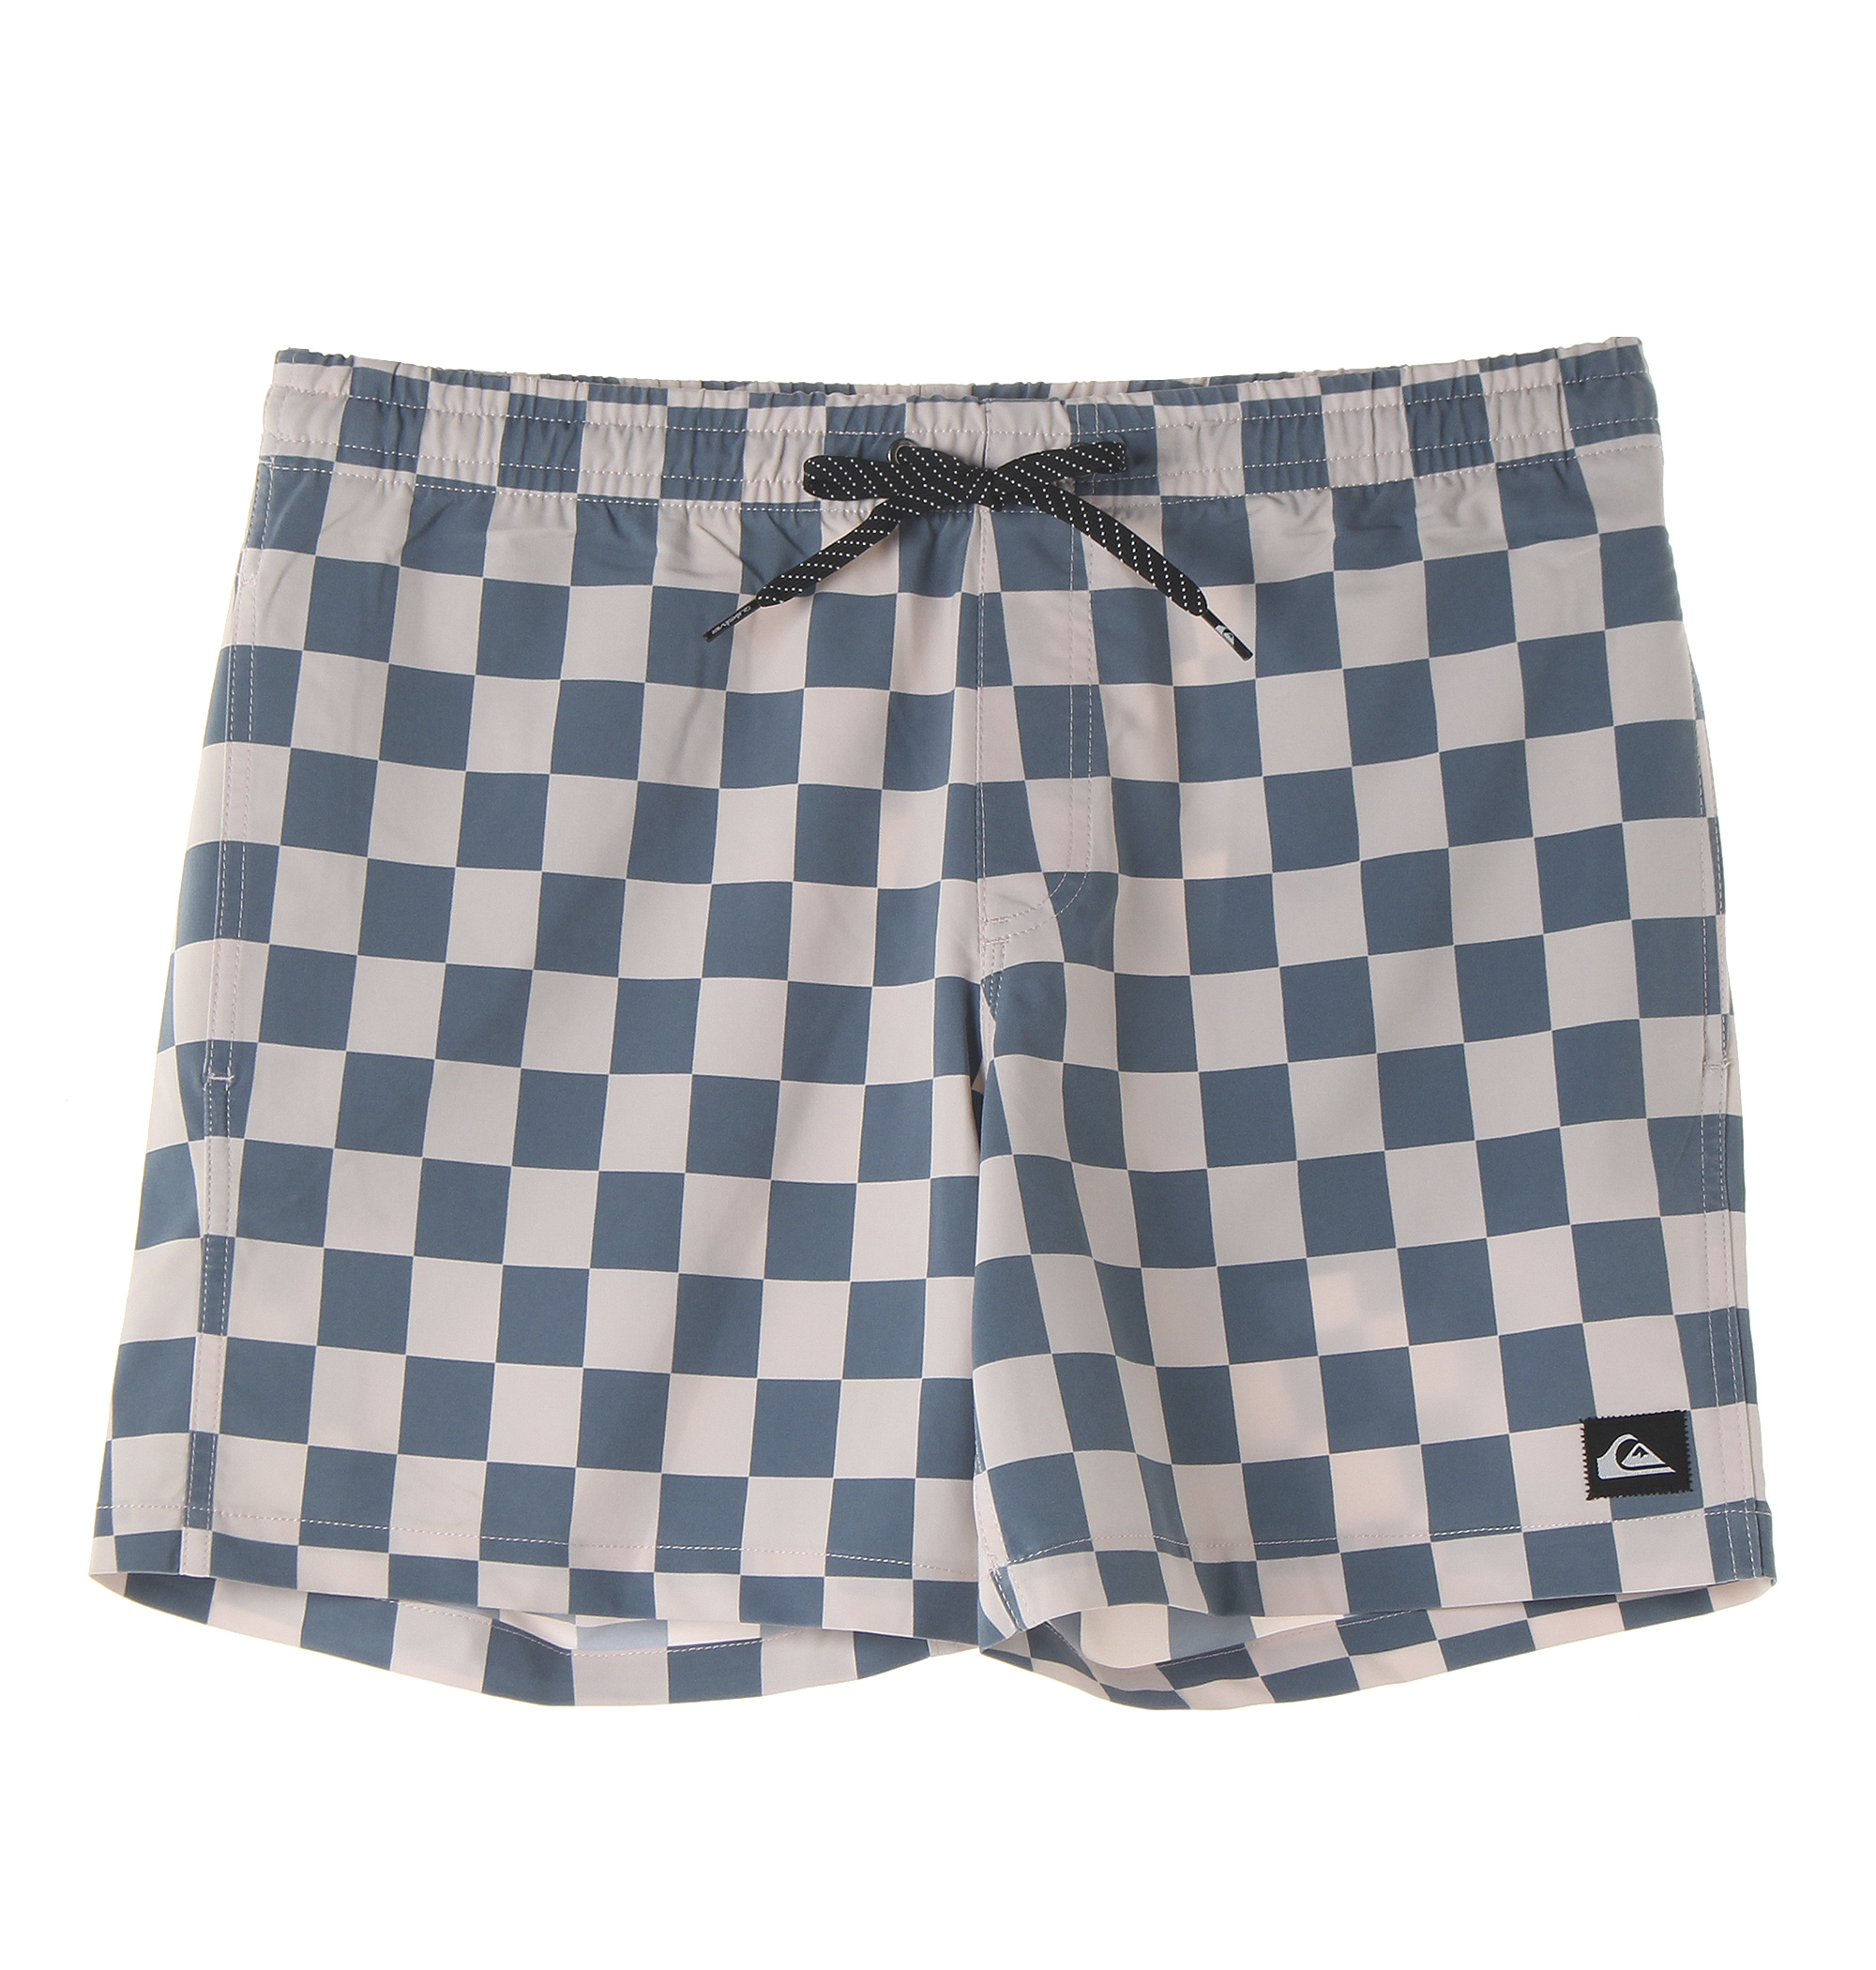 30%OFF セール SALE Quiksilver クイックシルバー 【OUTLET】CHECKER WASH VOLLEY 16NB 水着 海パン サーフィン